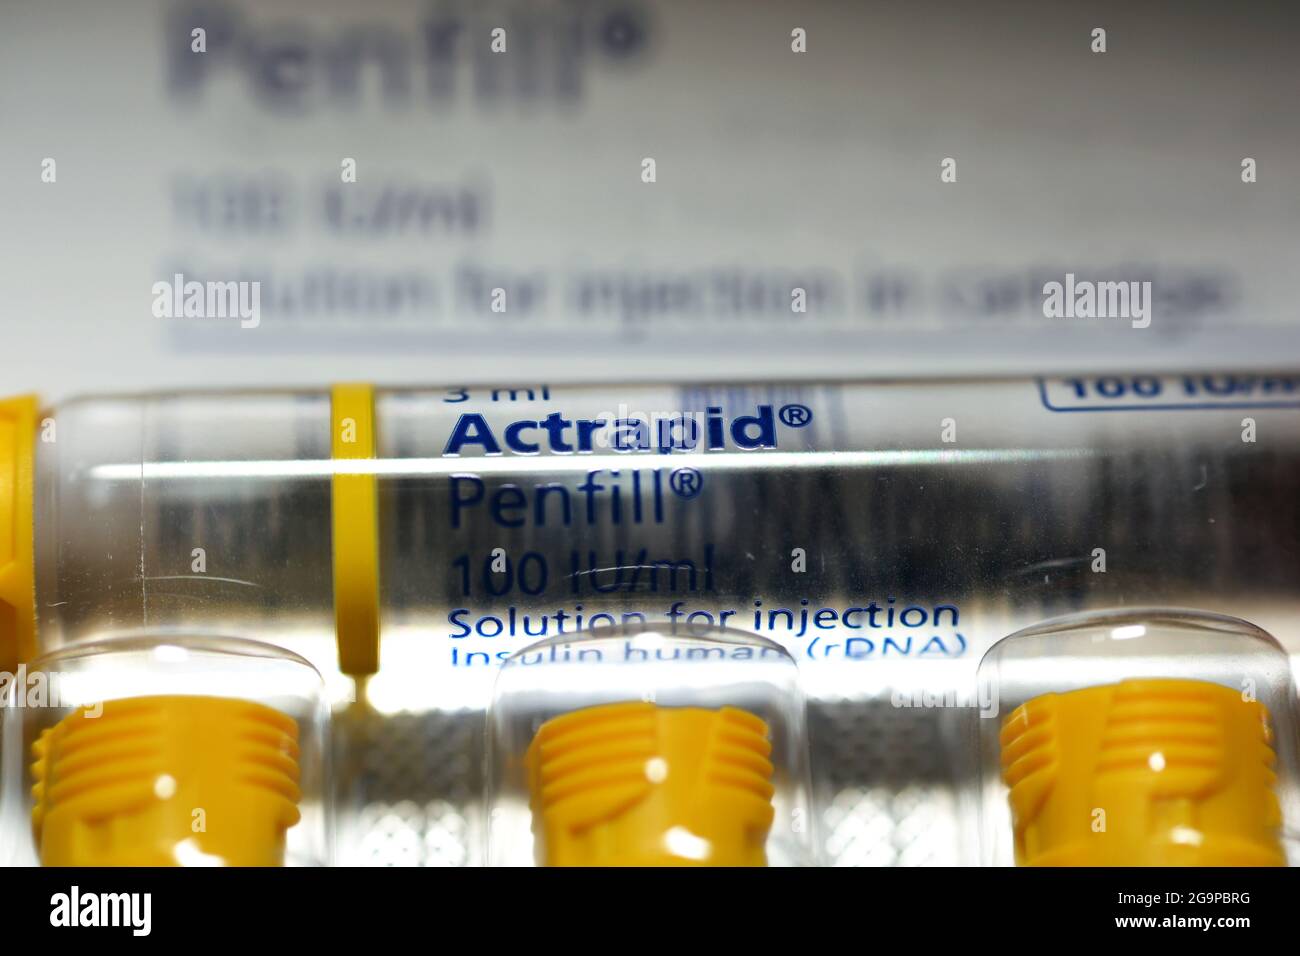 Actrapid human insulin rDNA penfill 100 IU solution for subcutaneous or intravenous injection in cartridge used in diabetic patients in IDDM patients Stock Photo